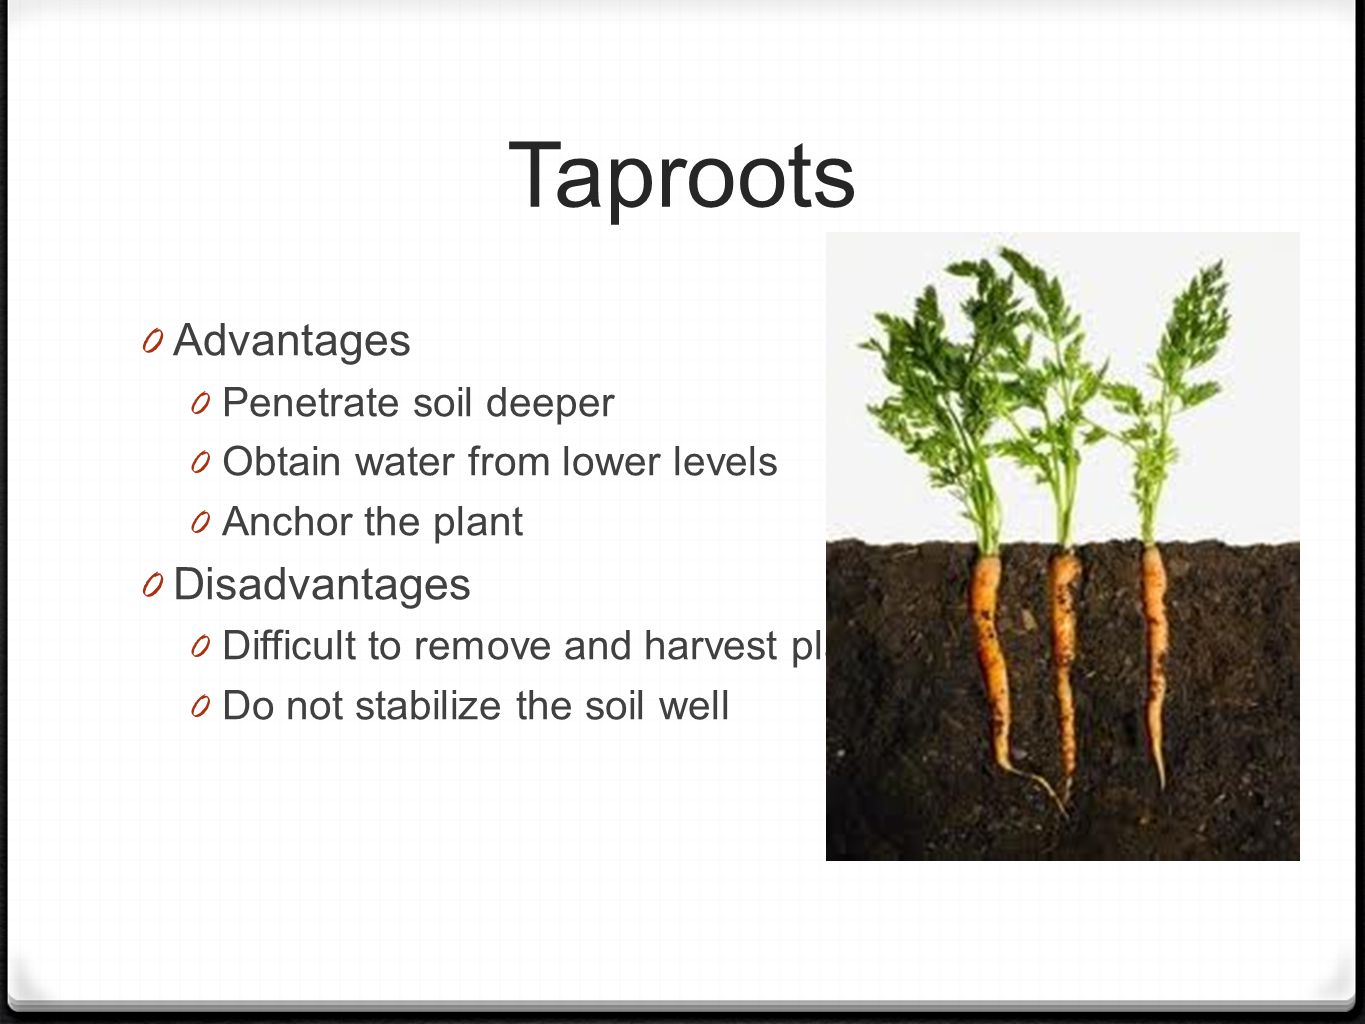 Taproots 0 Advantages 0 Penetrate soil deeper 0 Obtain water from lower levels 0 Anchor the plant 0 Disadvantages 0 Difficult to remove and harvest plants 0 Do not stabilize the soil well